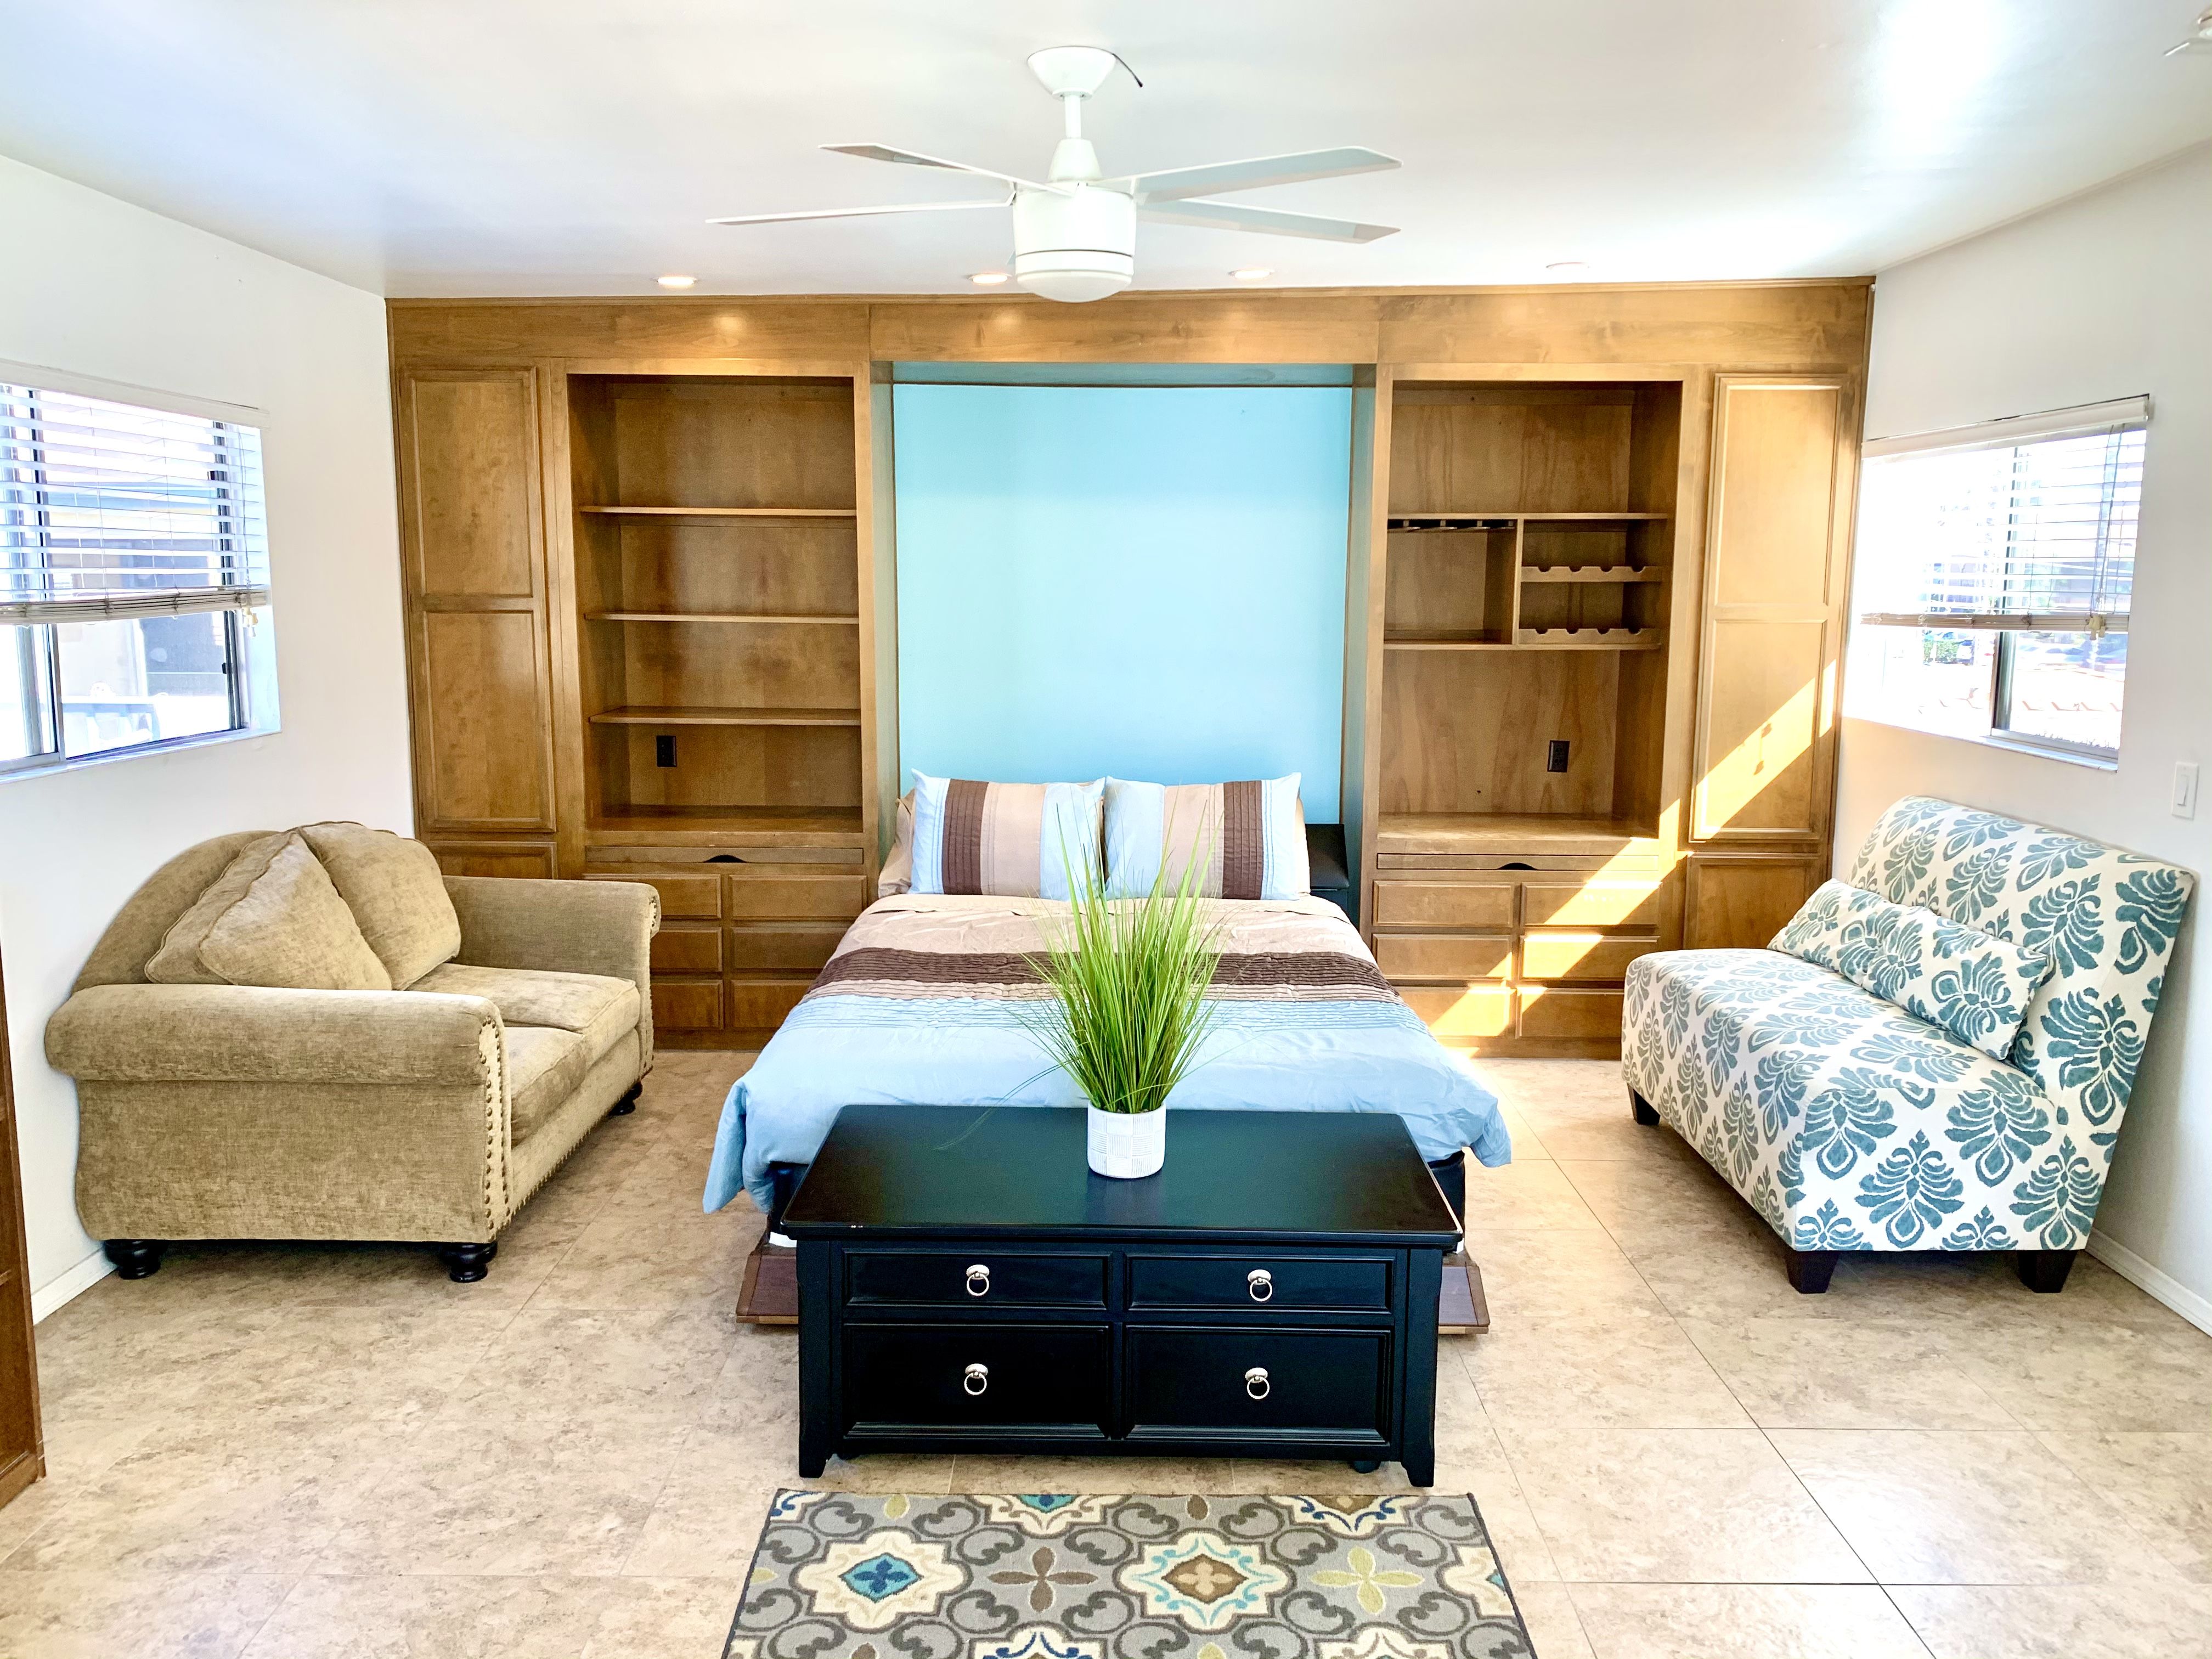 Murphy Bed Turns The Villa Into A Large Living Room In Seconds